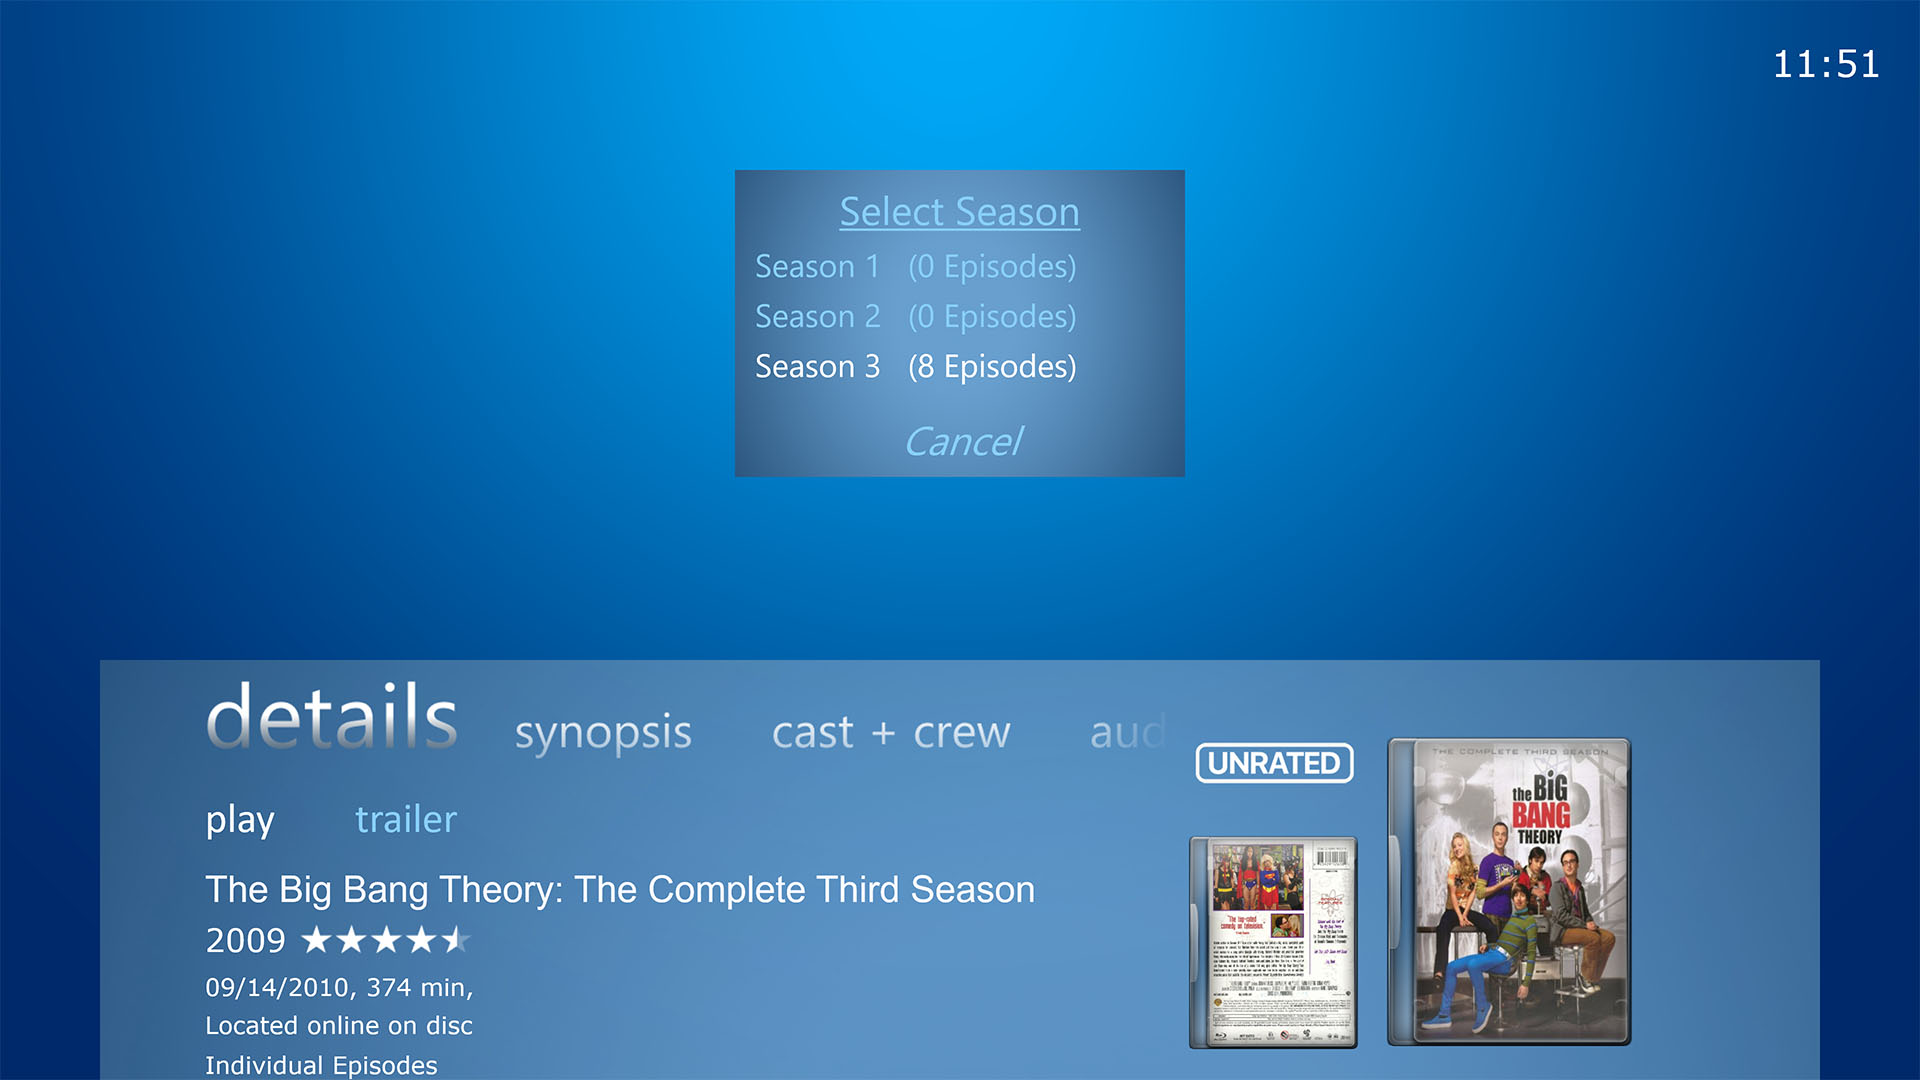 Select Season prompt, which shows prior seasons which are currently not selectable